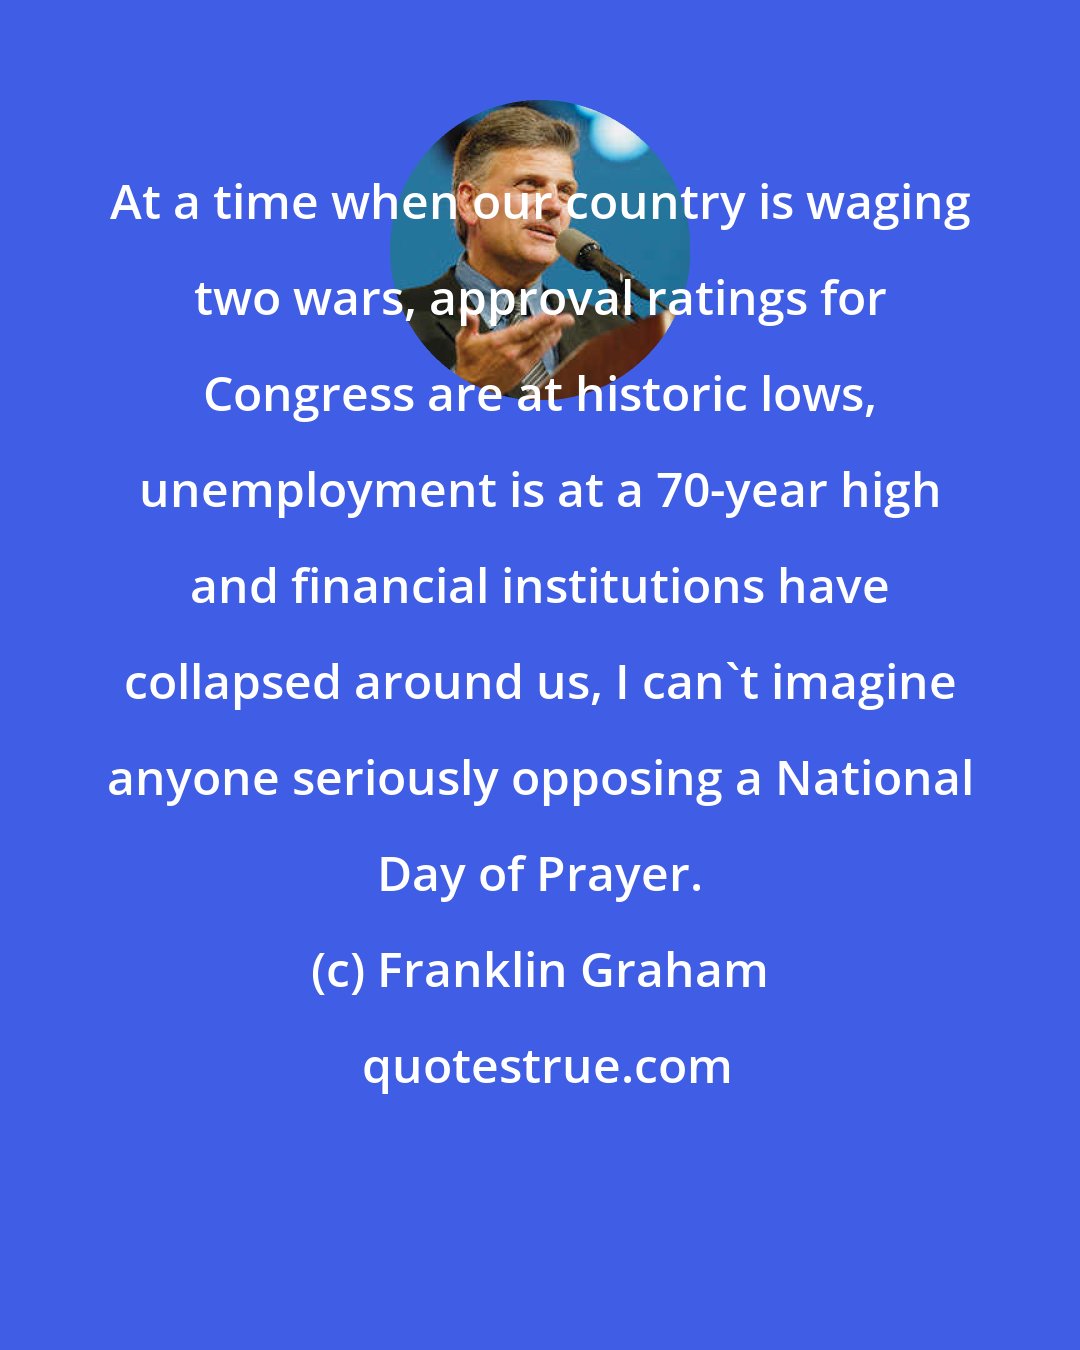 Franklin Graham: At a time when our country is waging two wars, approval ratings for Congress are at historic lows, unemployment is at a 70-year high and financial institutions have collapsed around us, I can't imagine anyone seriously opposing a National Day of Prayer.